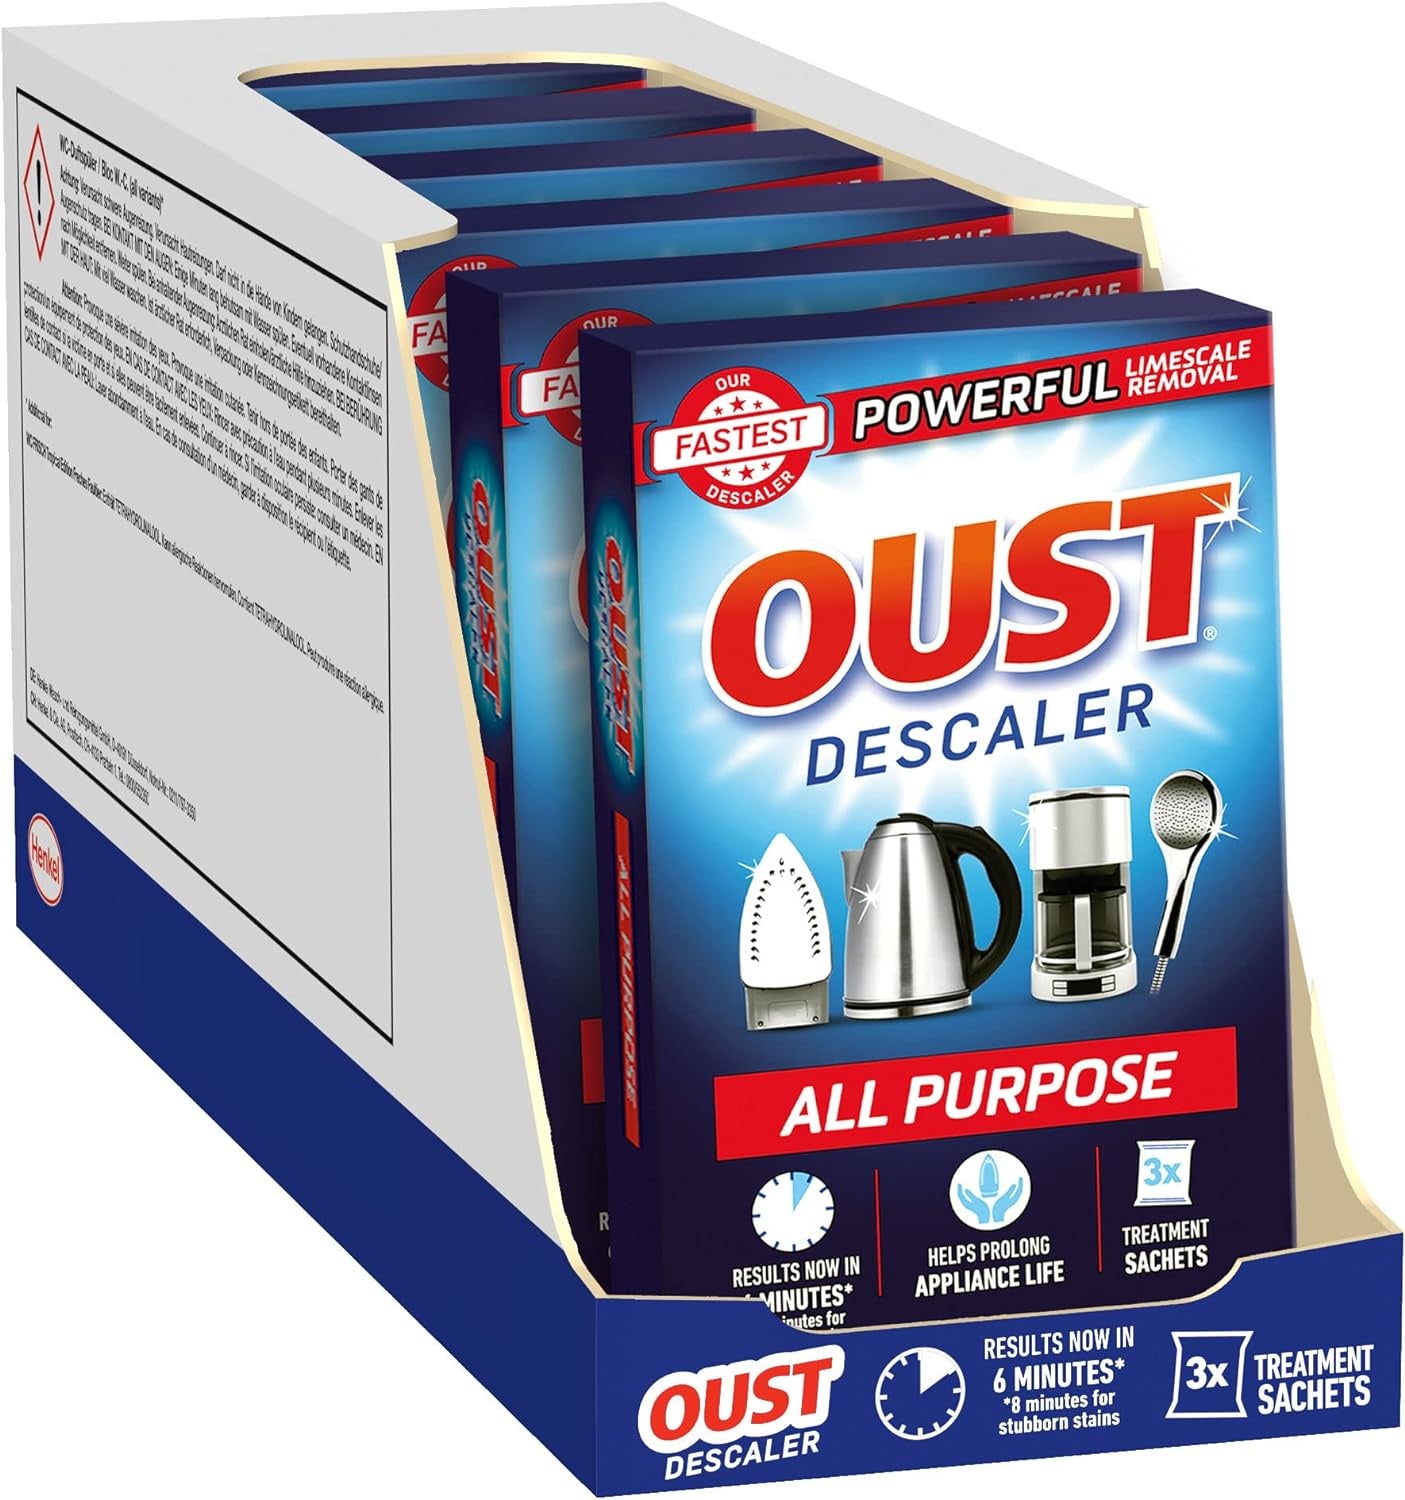 Oust Powerful All Purpose Descaler, Limescale Remover - 3 Sachets x 6 (18 Sachets Total)